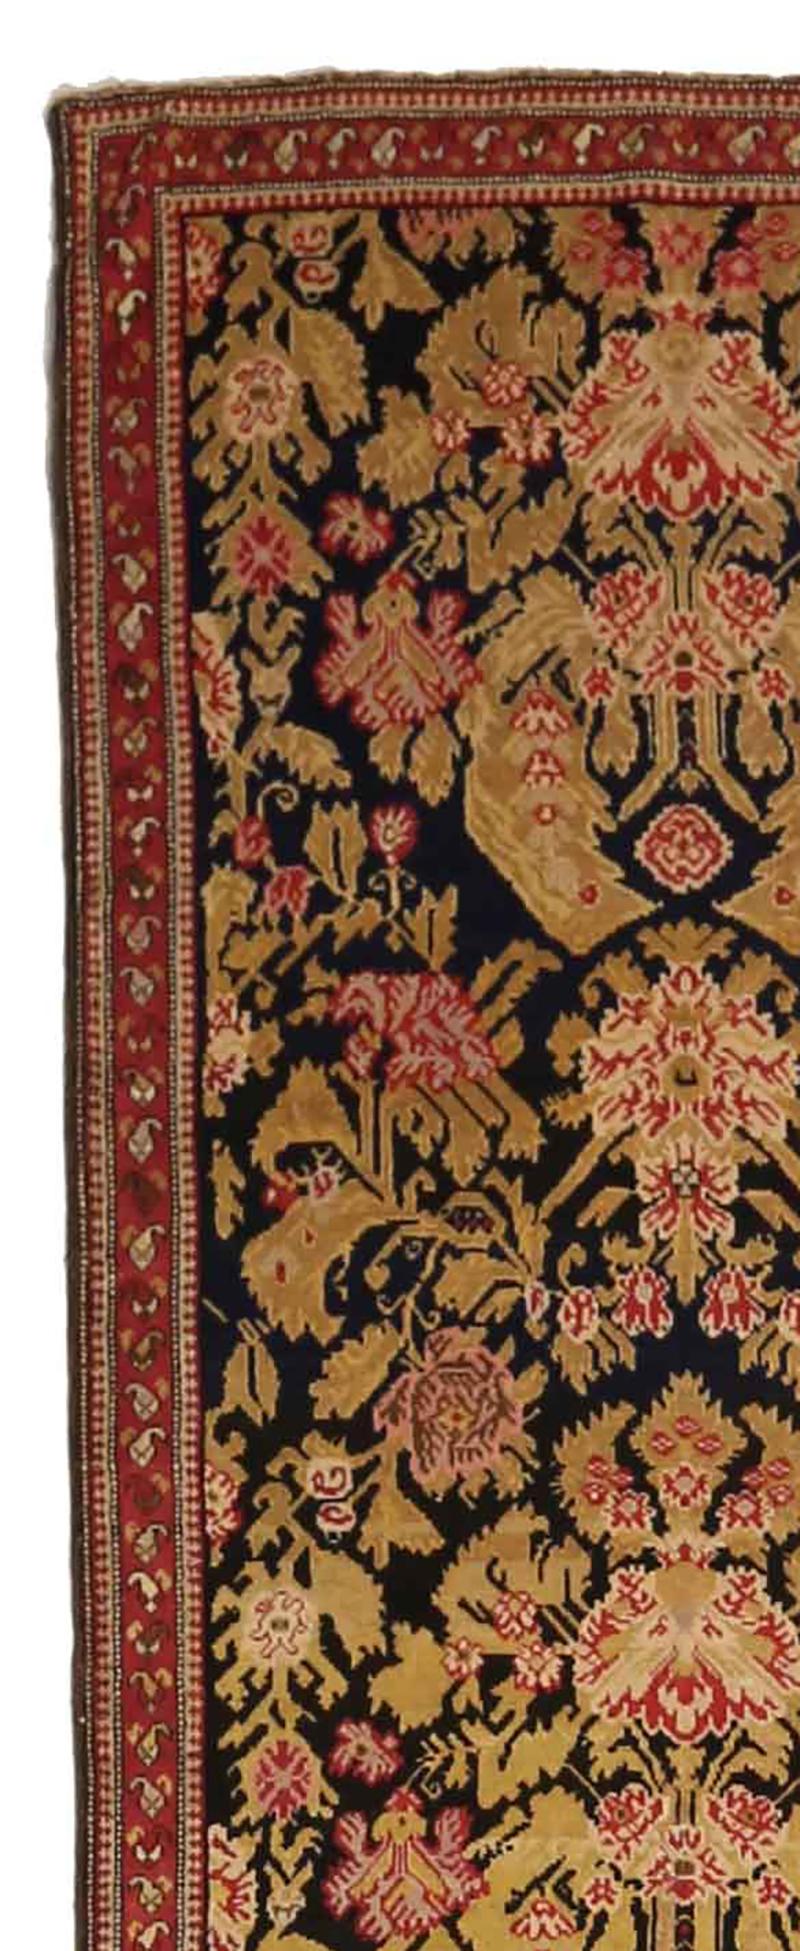 Antique Persian rug handwoven from the finest sheep’s wool and colored with all-natural vegetable dyes that are safe for humans and pets. It’s a traditional Karabagh design featuring a deep black field covered with red, ivory and golden floral